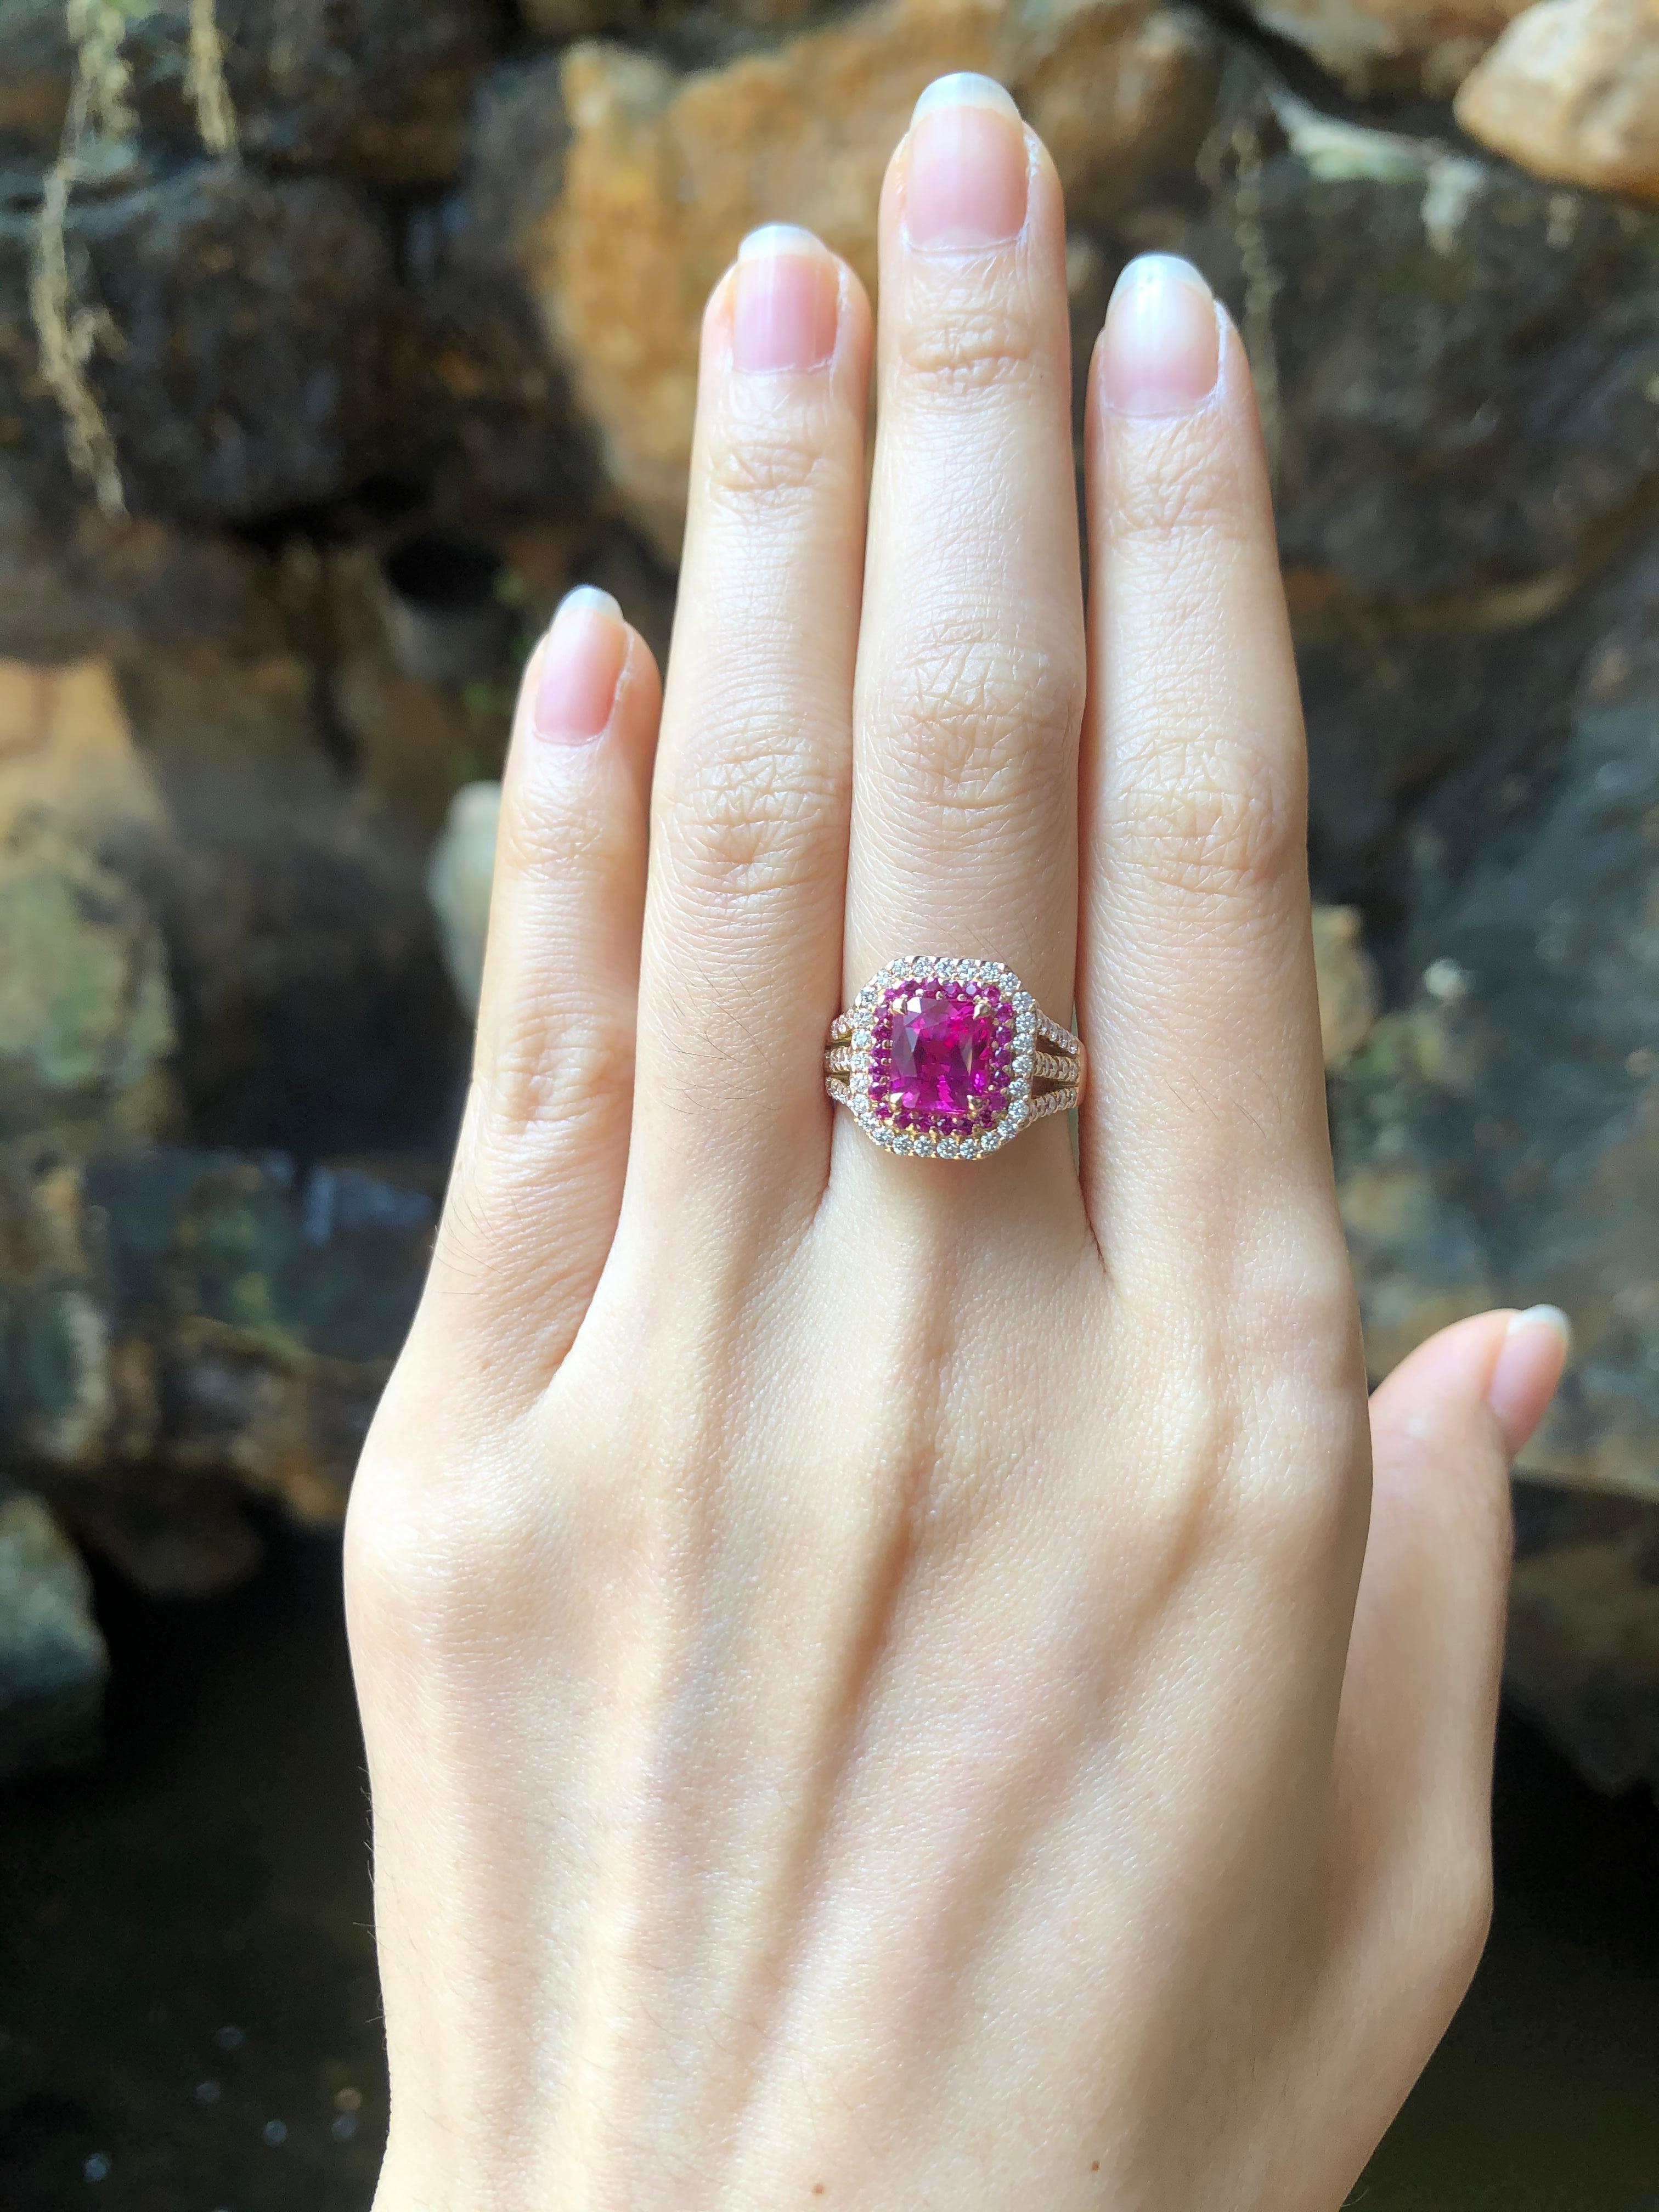 Pink Sapphire 2.23 carats with Pink Sapphire 0.22 carat and Diamond 0.62 carat Ring set in 18 Karat Rose Gold Settings

Width:  1.1 cm 
Length: 1.3 cm
Ring Size: 51 1/2 (US 6)
Total Weight: 6.29 grams

